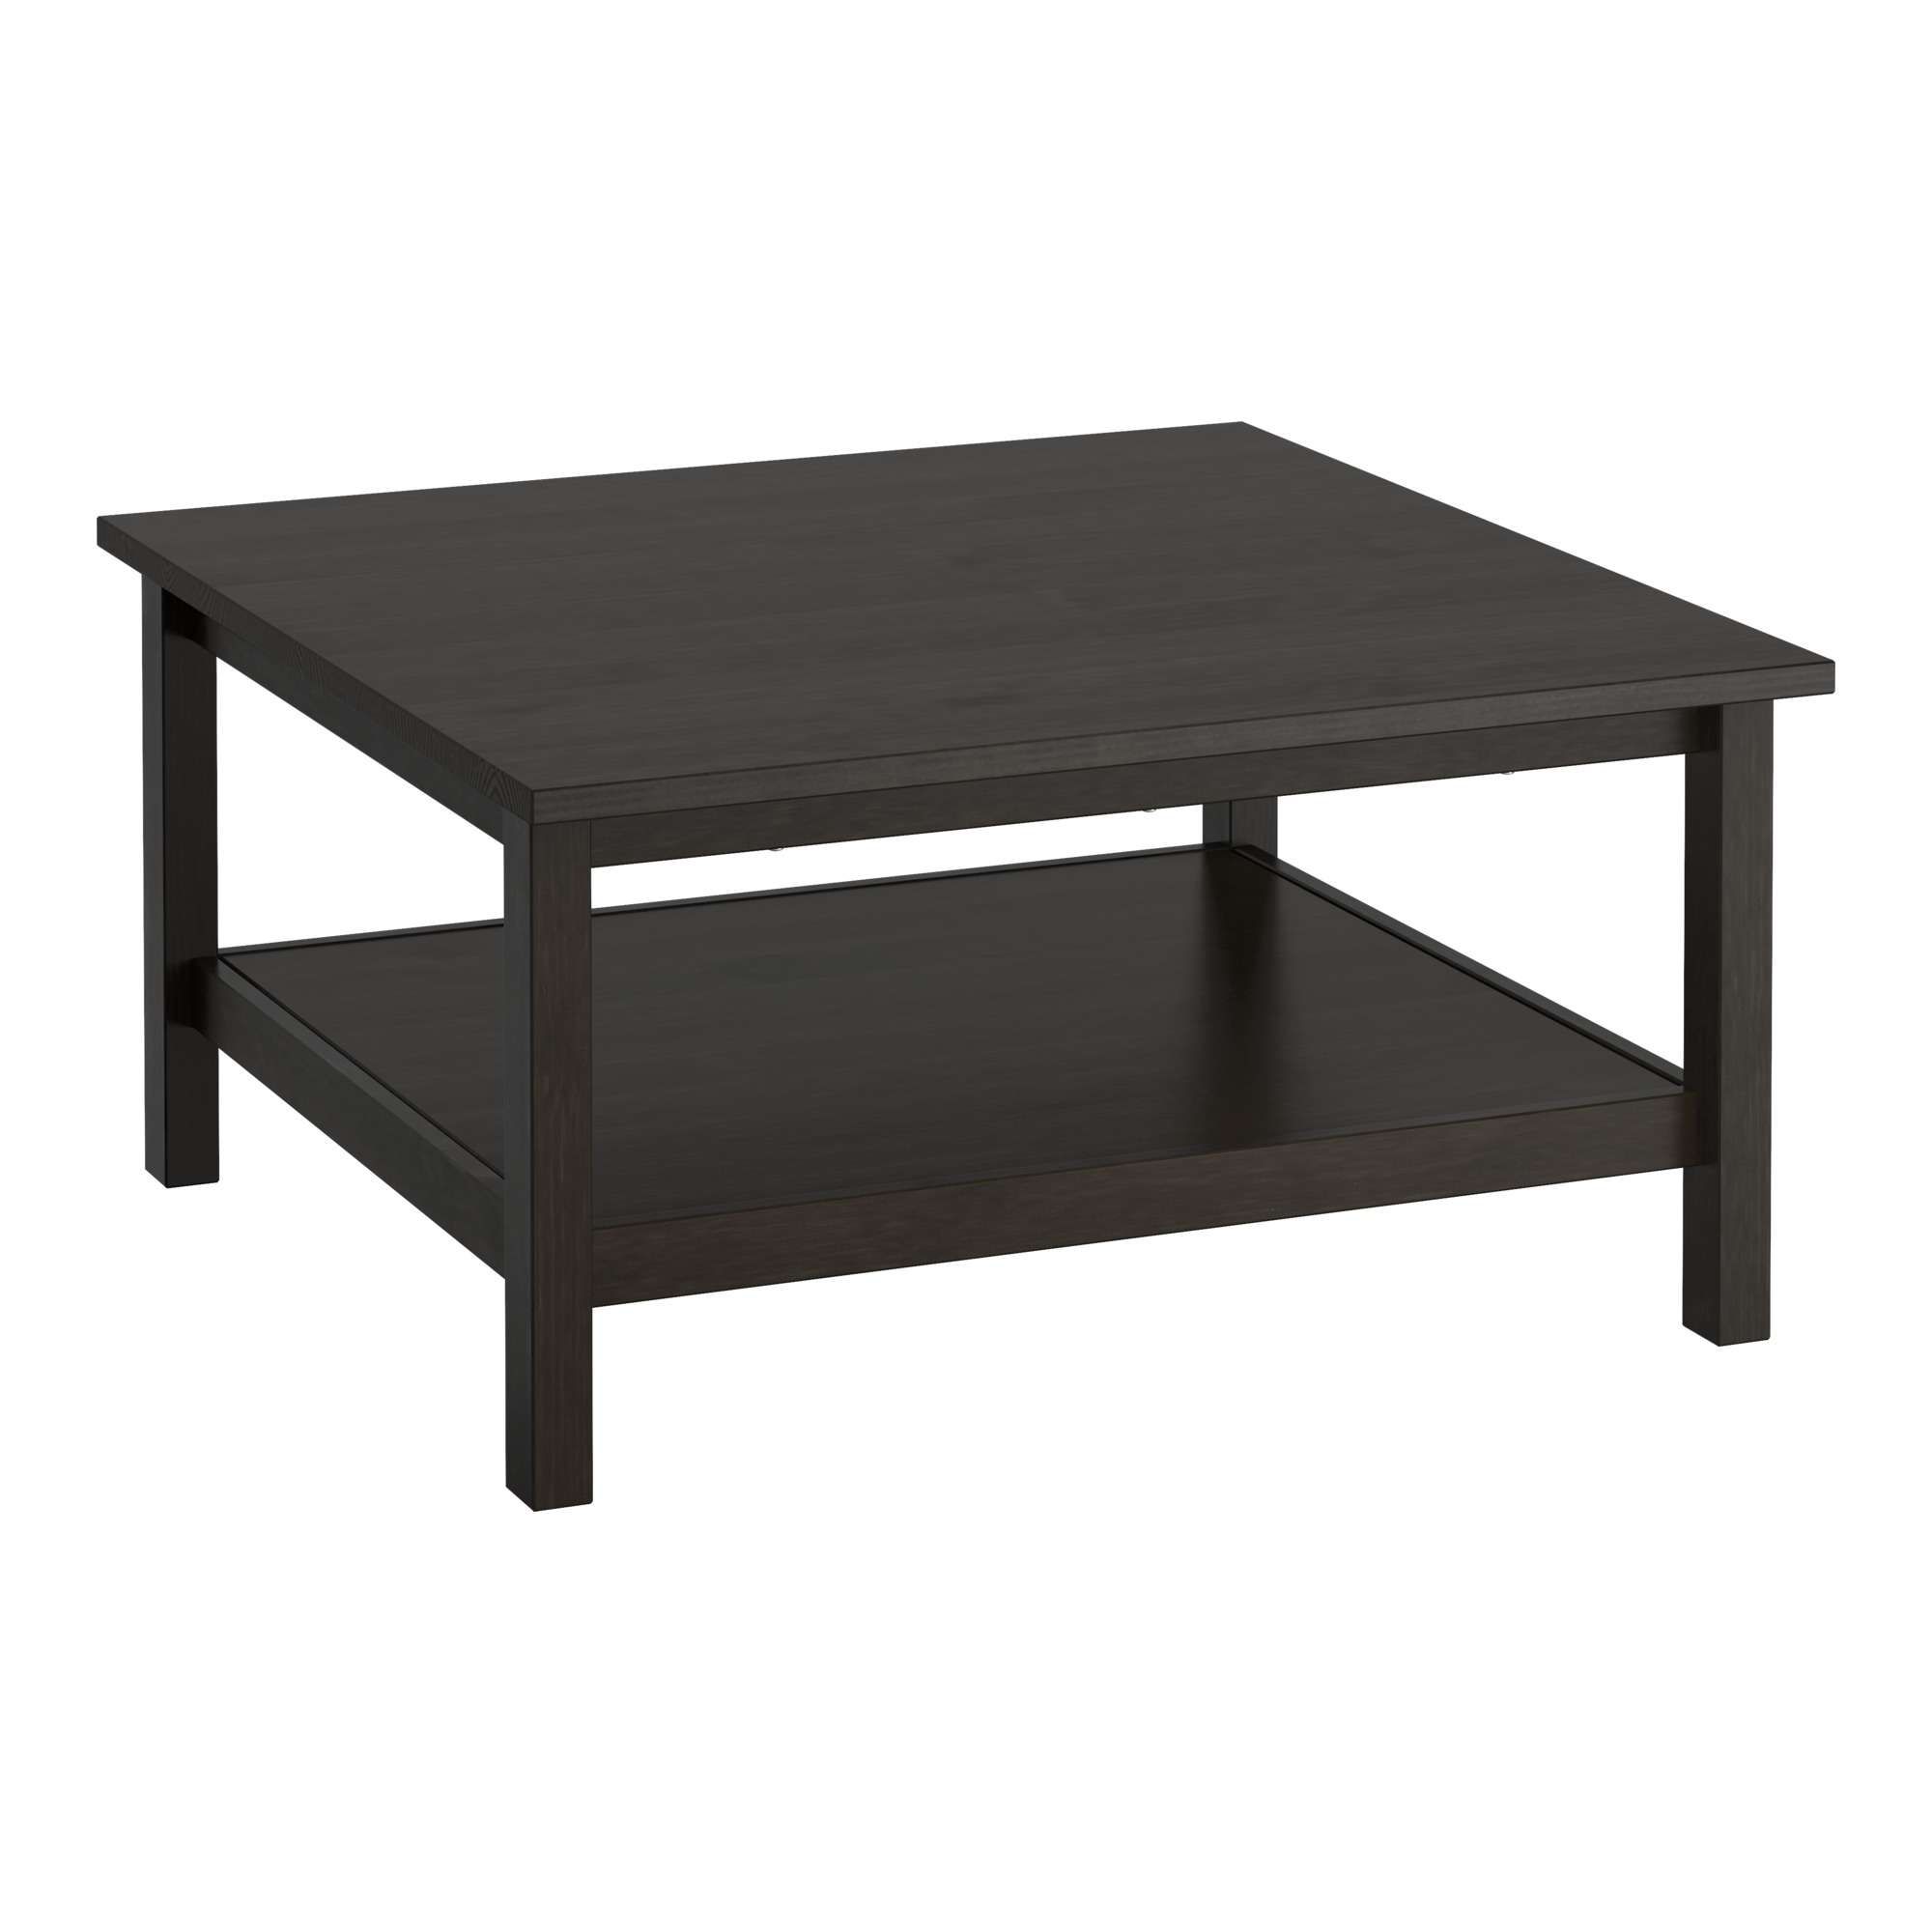 Most Popular Square Black Coffee Tables Intended For Hemnes Coffee Table – Black Brown – Ikea (View 1 of 20)